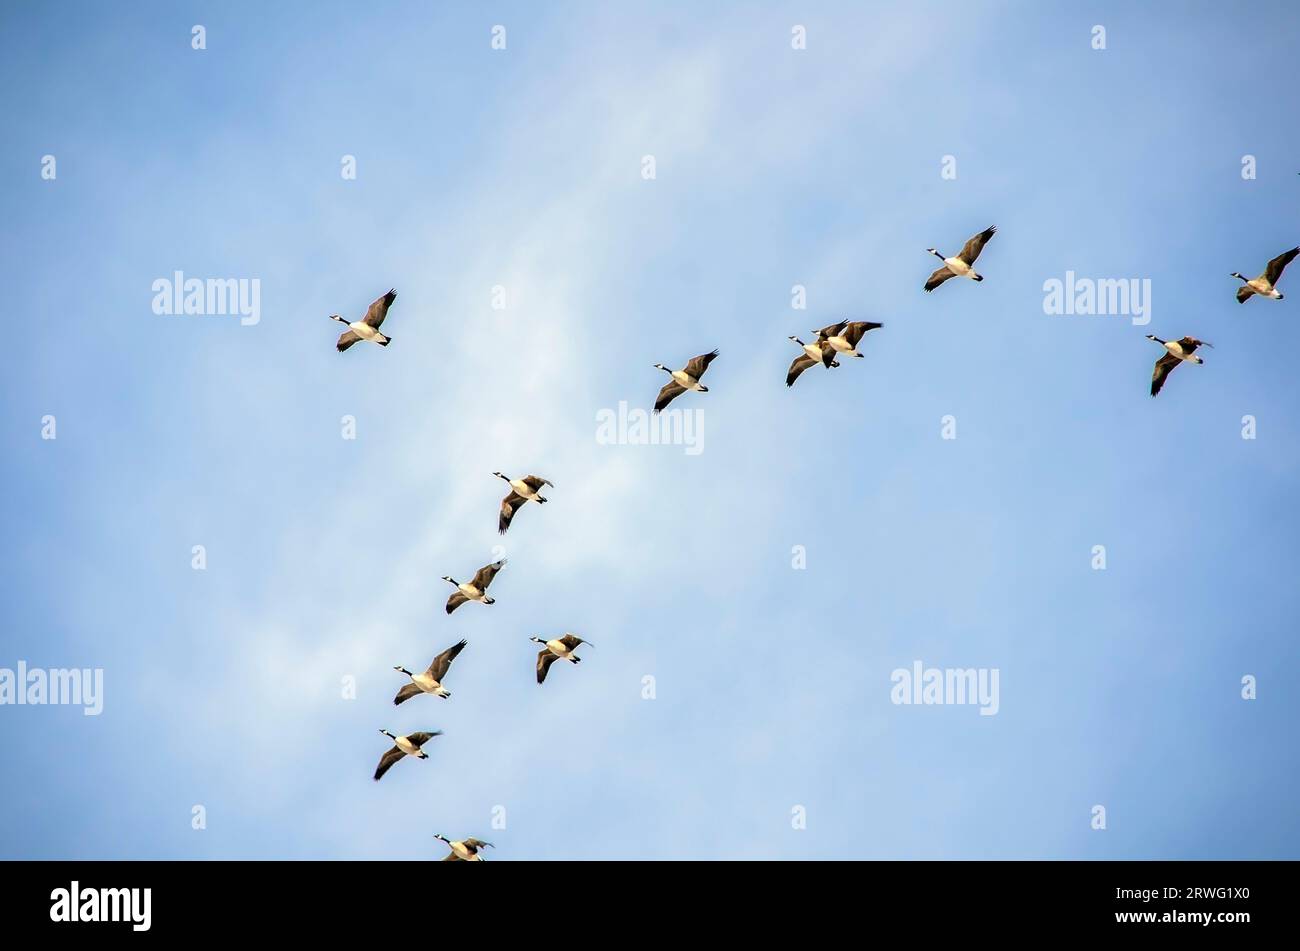 formation of Canada geese in flight Stock Photo